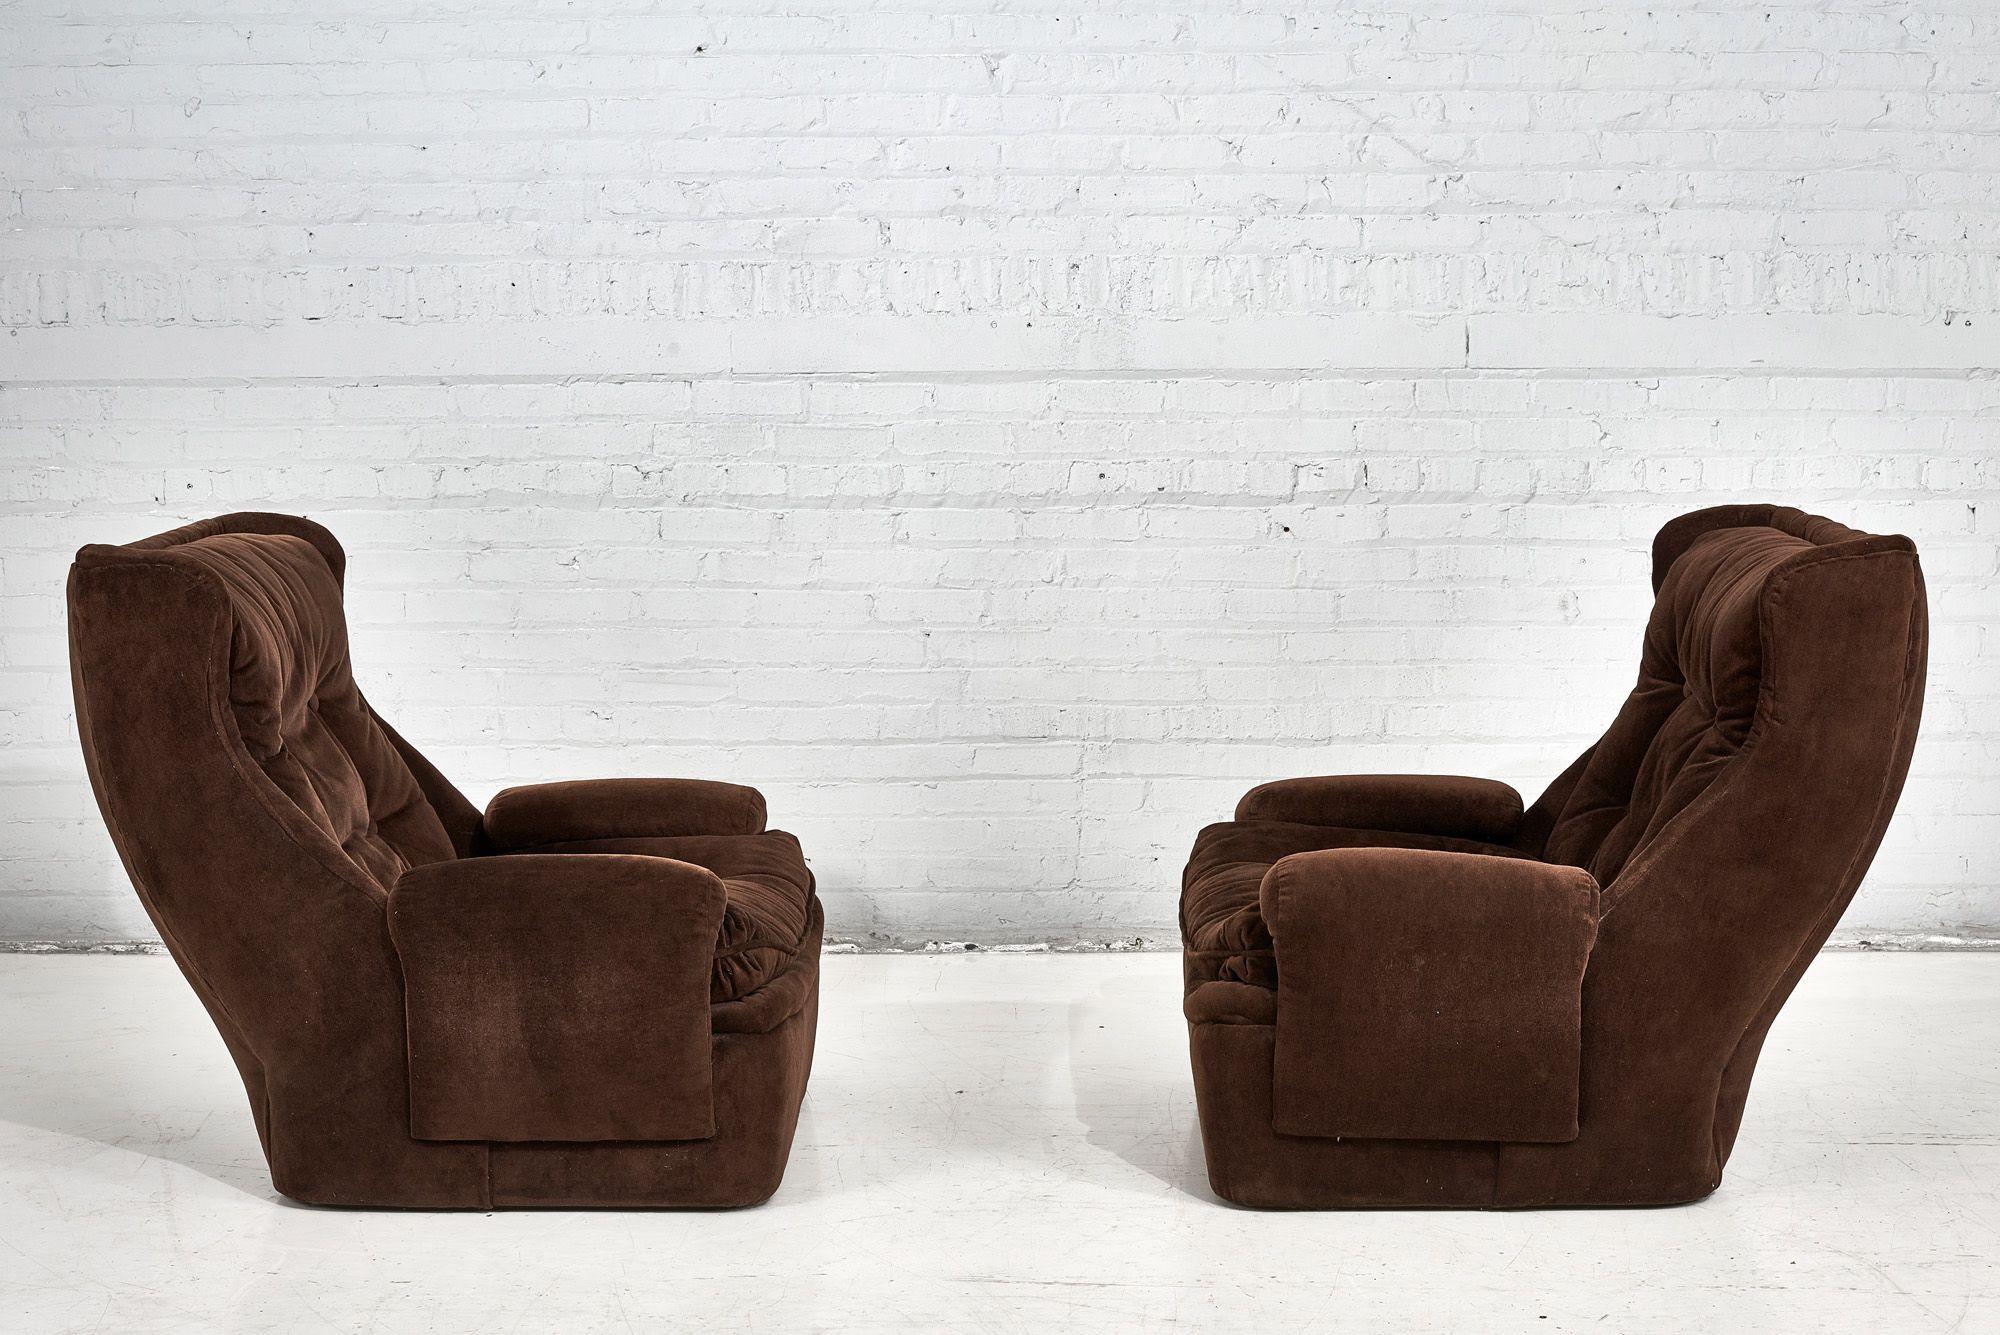 Orchidee Lounge Chairs by Michel Cadestin for Airborne with Ottoman France, 1968 For Sale 6